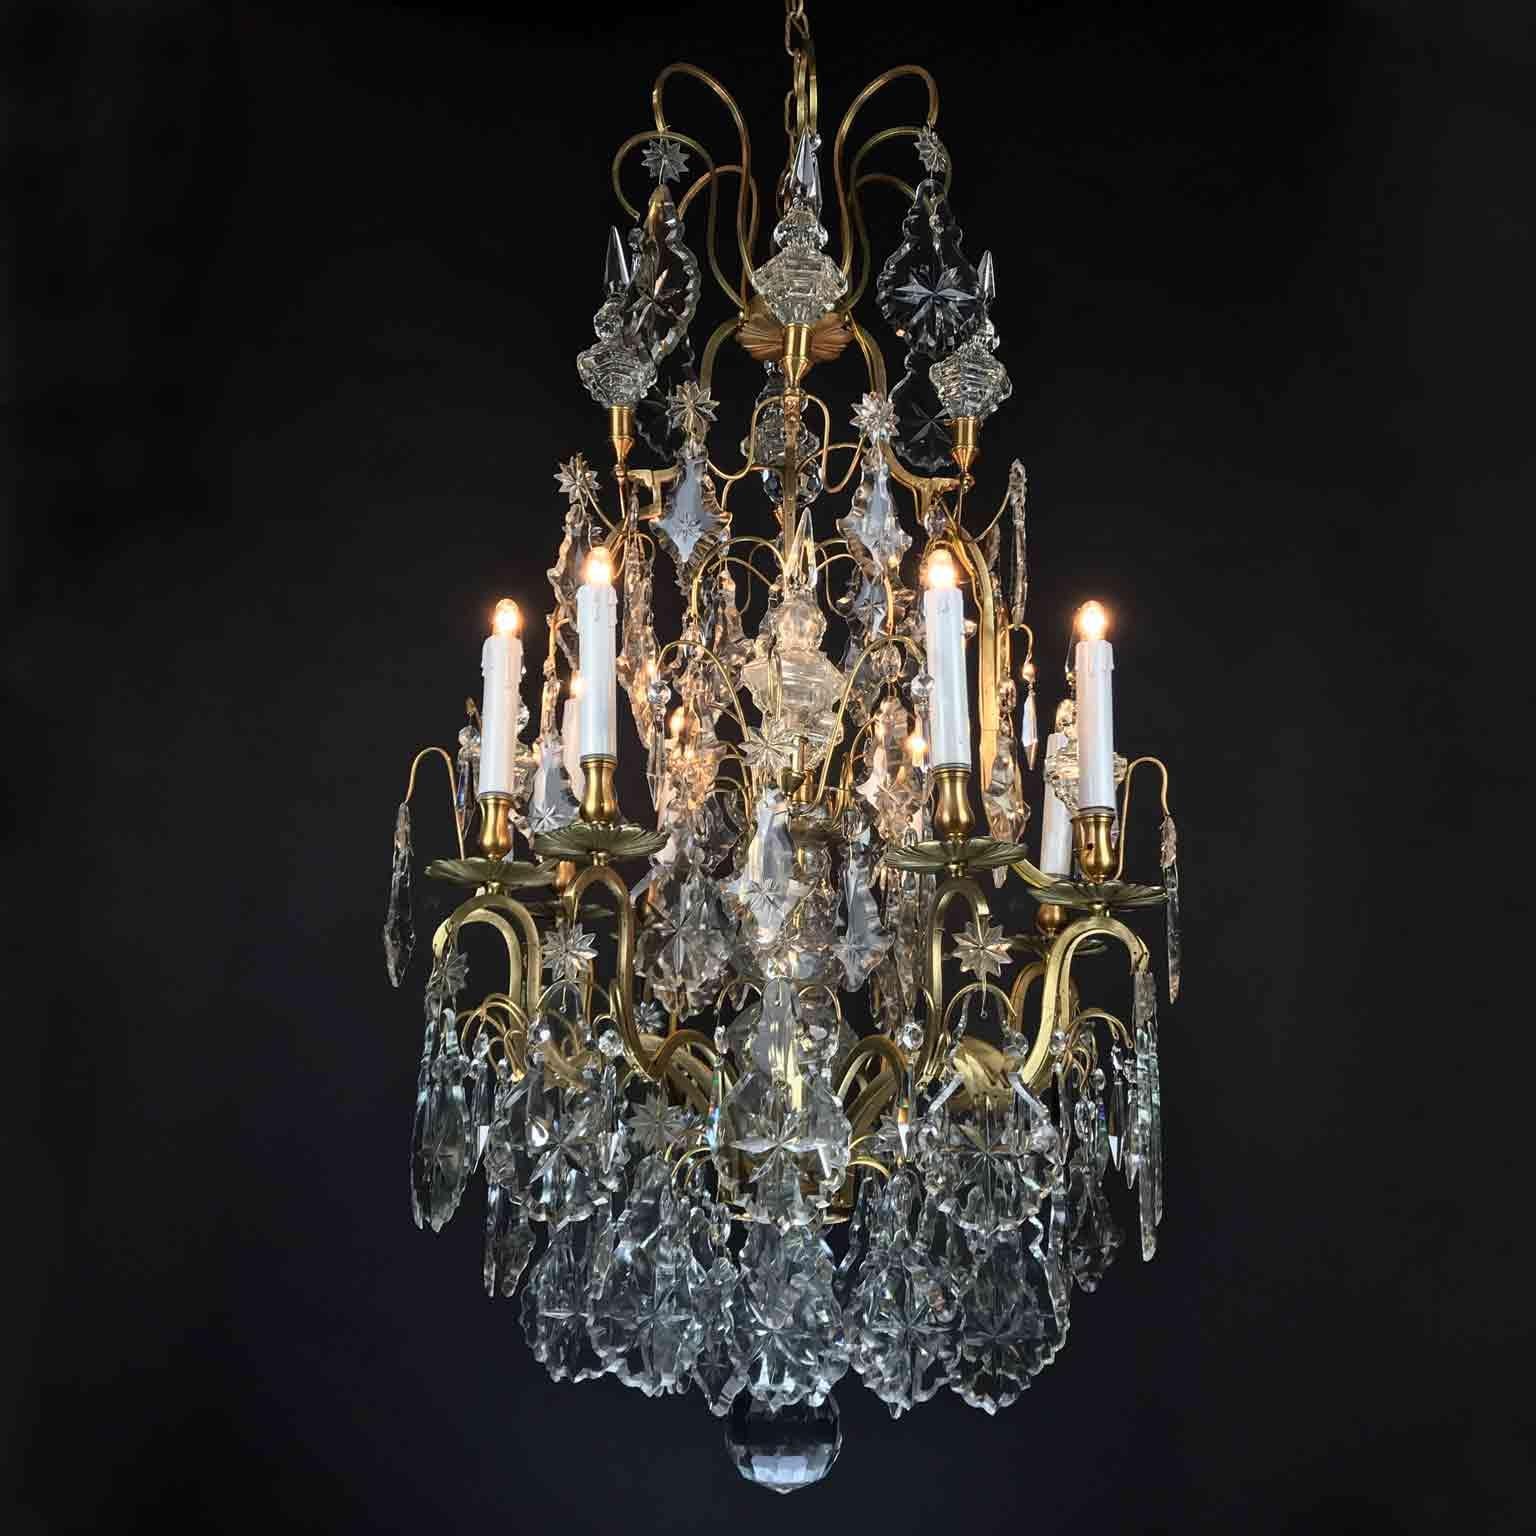 A romantic Louis XV style crystal chandelier of French origin, an eight-light pendant dating back to the late 19th century, realized with a vertical bronze structure, a birdcage shaped frame, topped by crystal elements and adorned with crystal